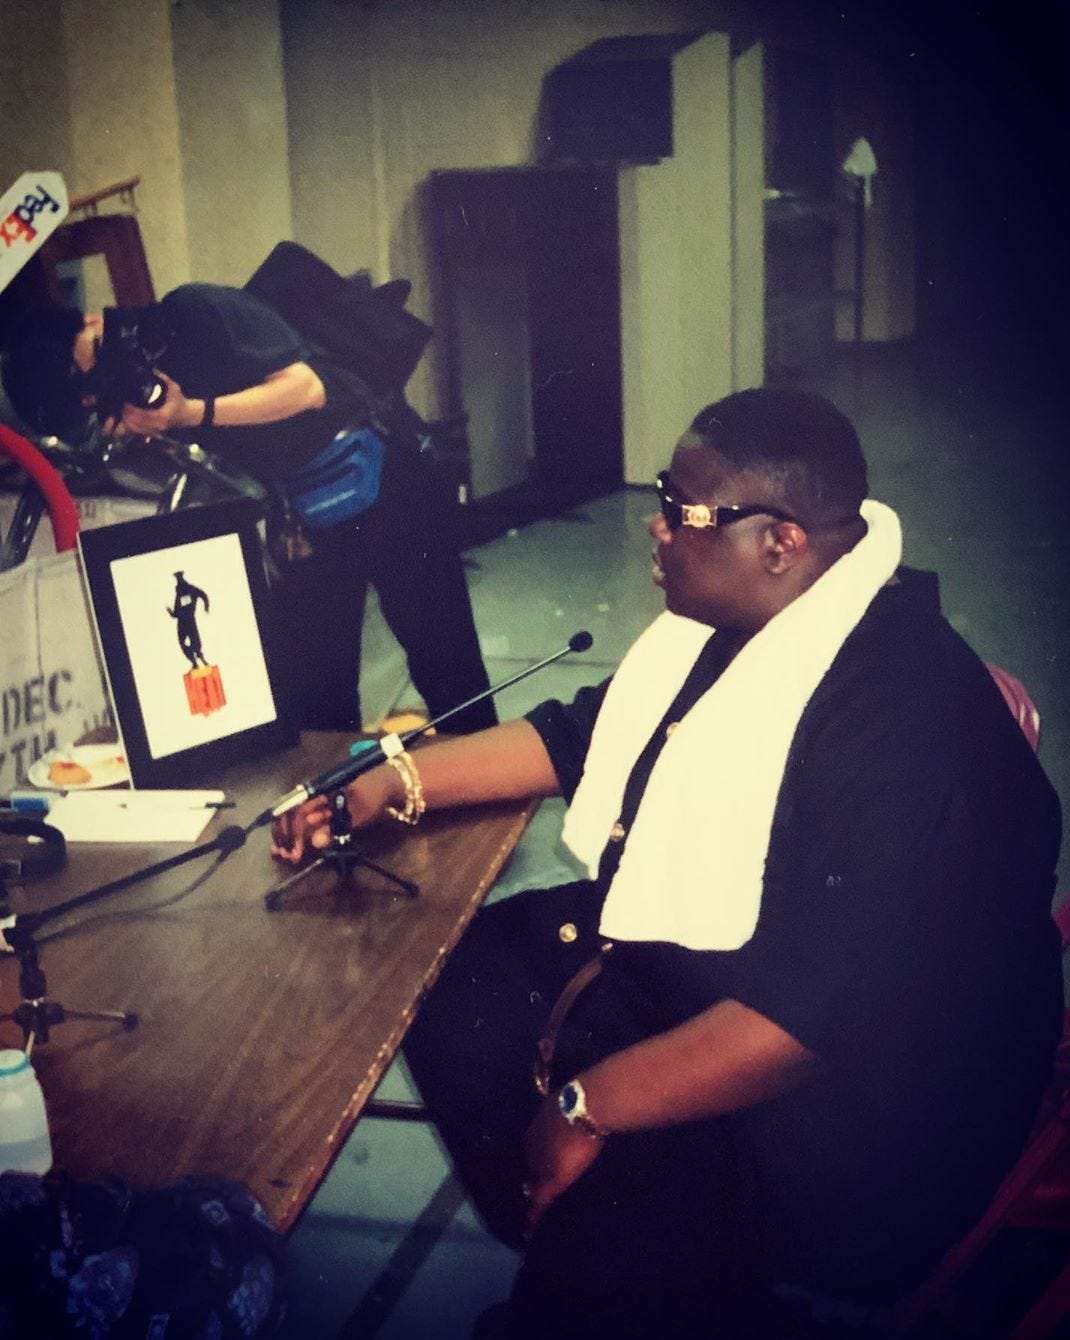 #NOTORIOUS BIG from The Notorious B.I.G.